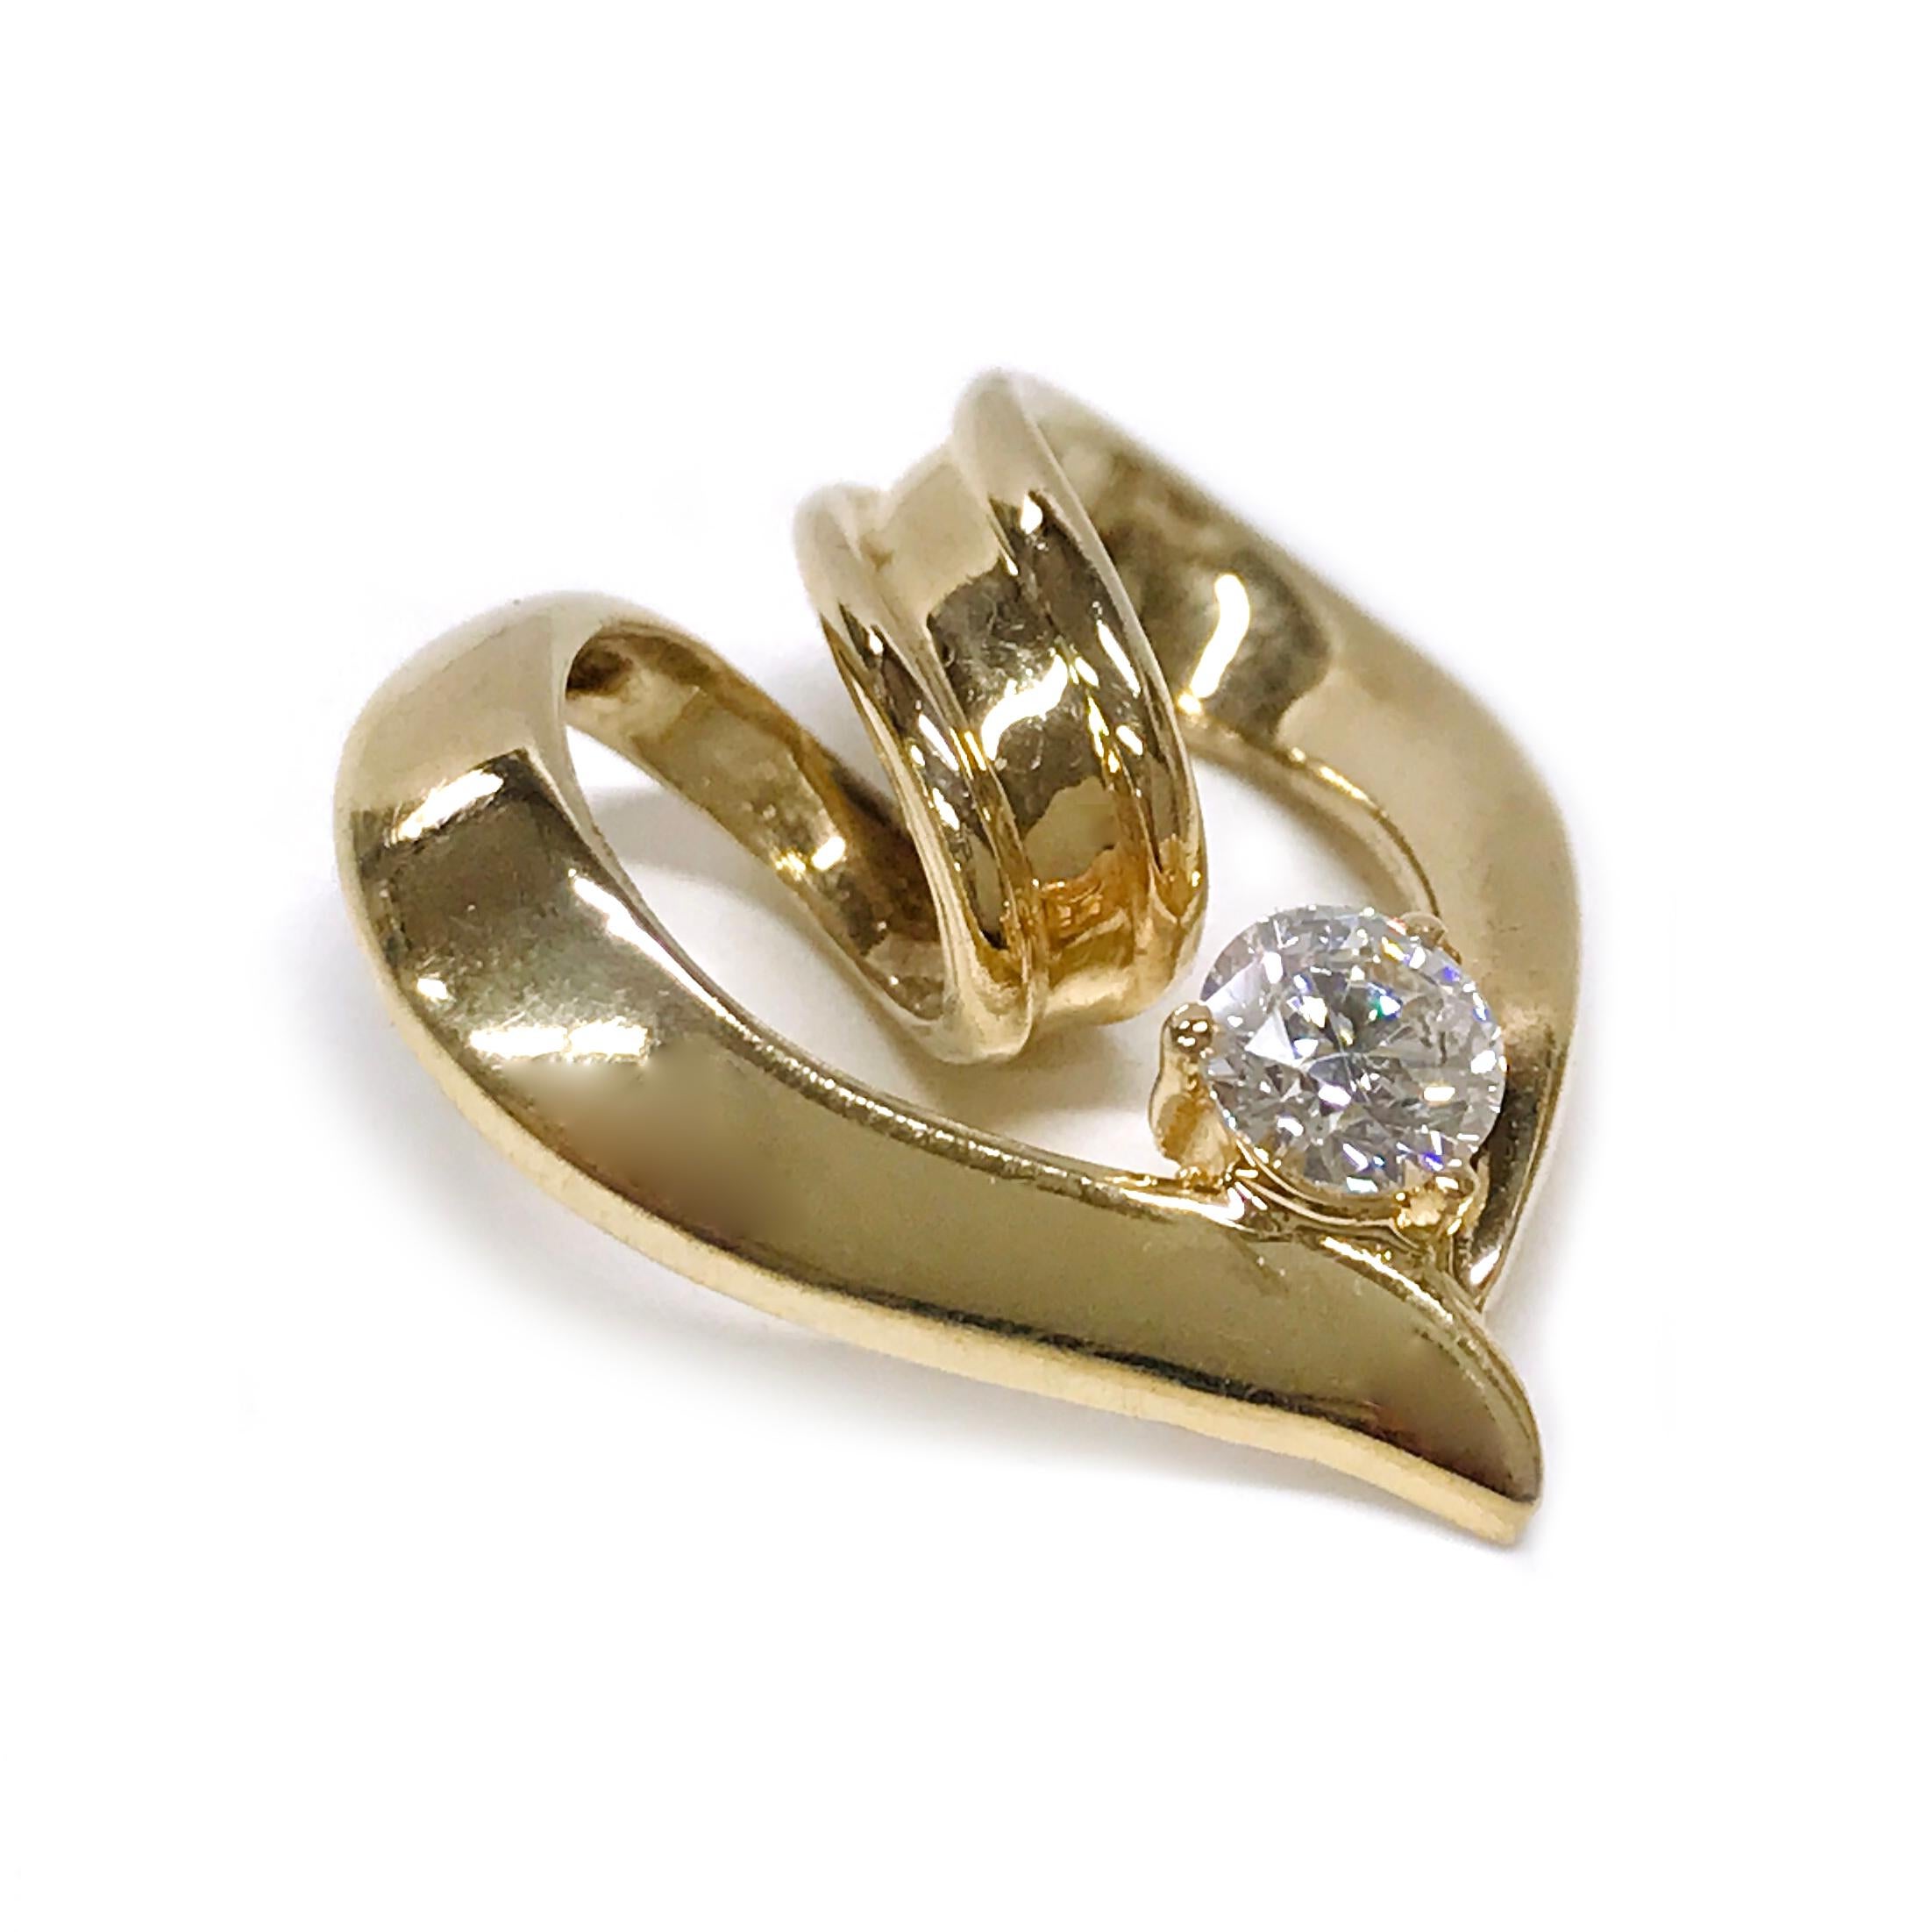 14 Karat Diamond Heart Slide Pendant. A single round diamond is a three-prong set in yellow gold on the bottom center of the heart where the curves meet. The heart is created by two ribbon-like gold swirls. The diamond measures 4.3mm and has a total